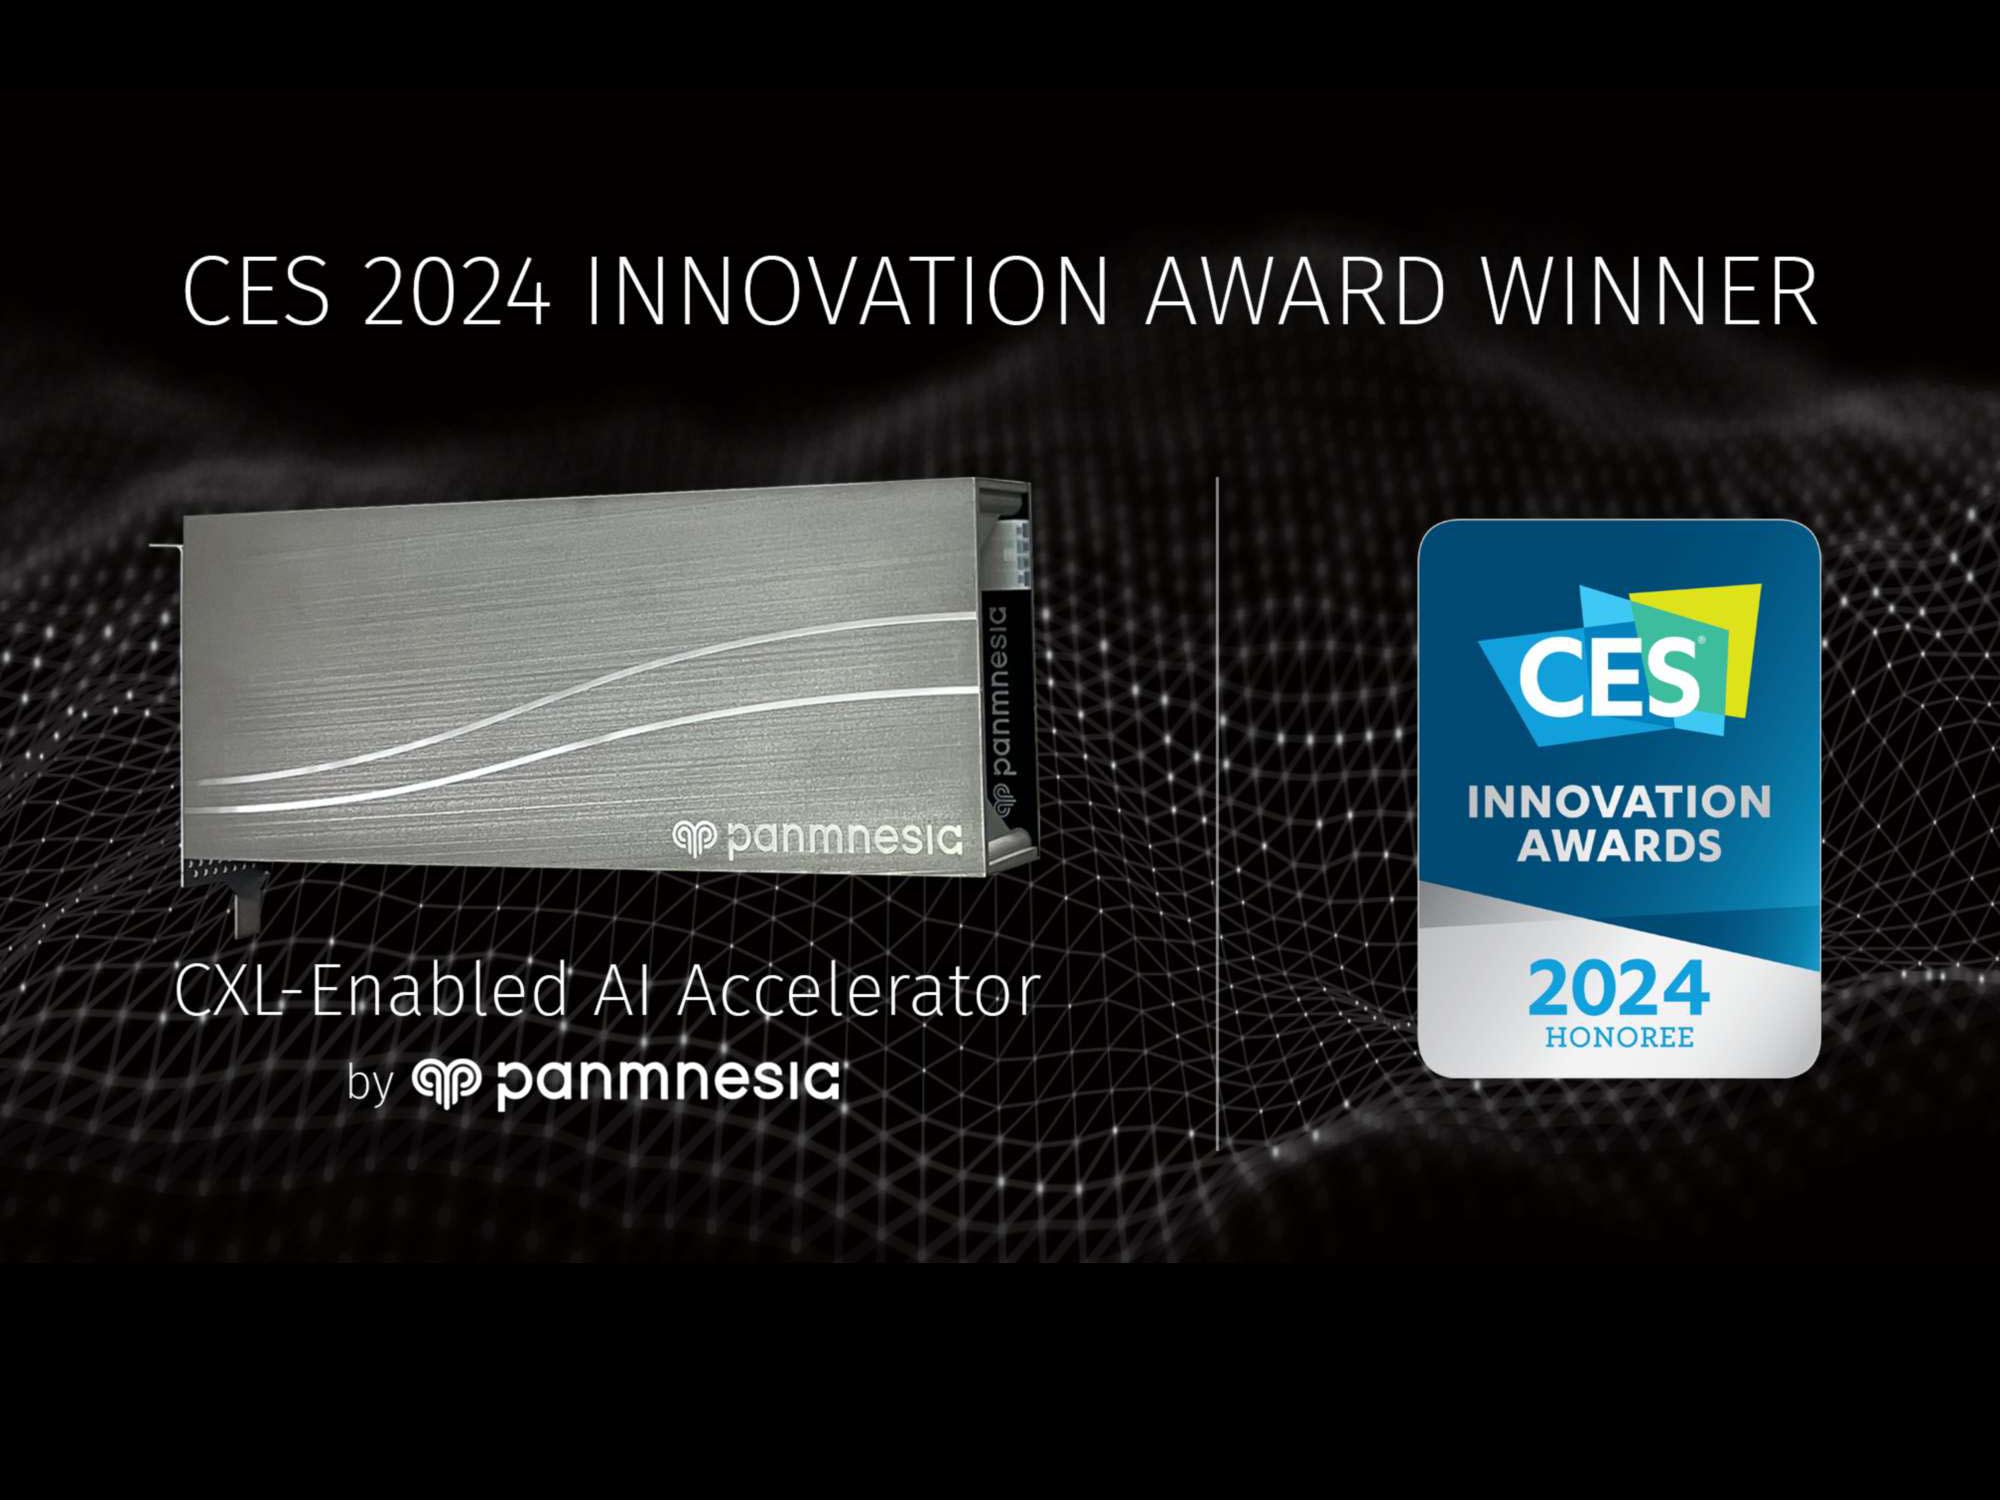 Panmnesia has received the CES 2024 Innovation Award